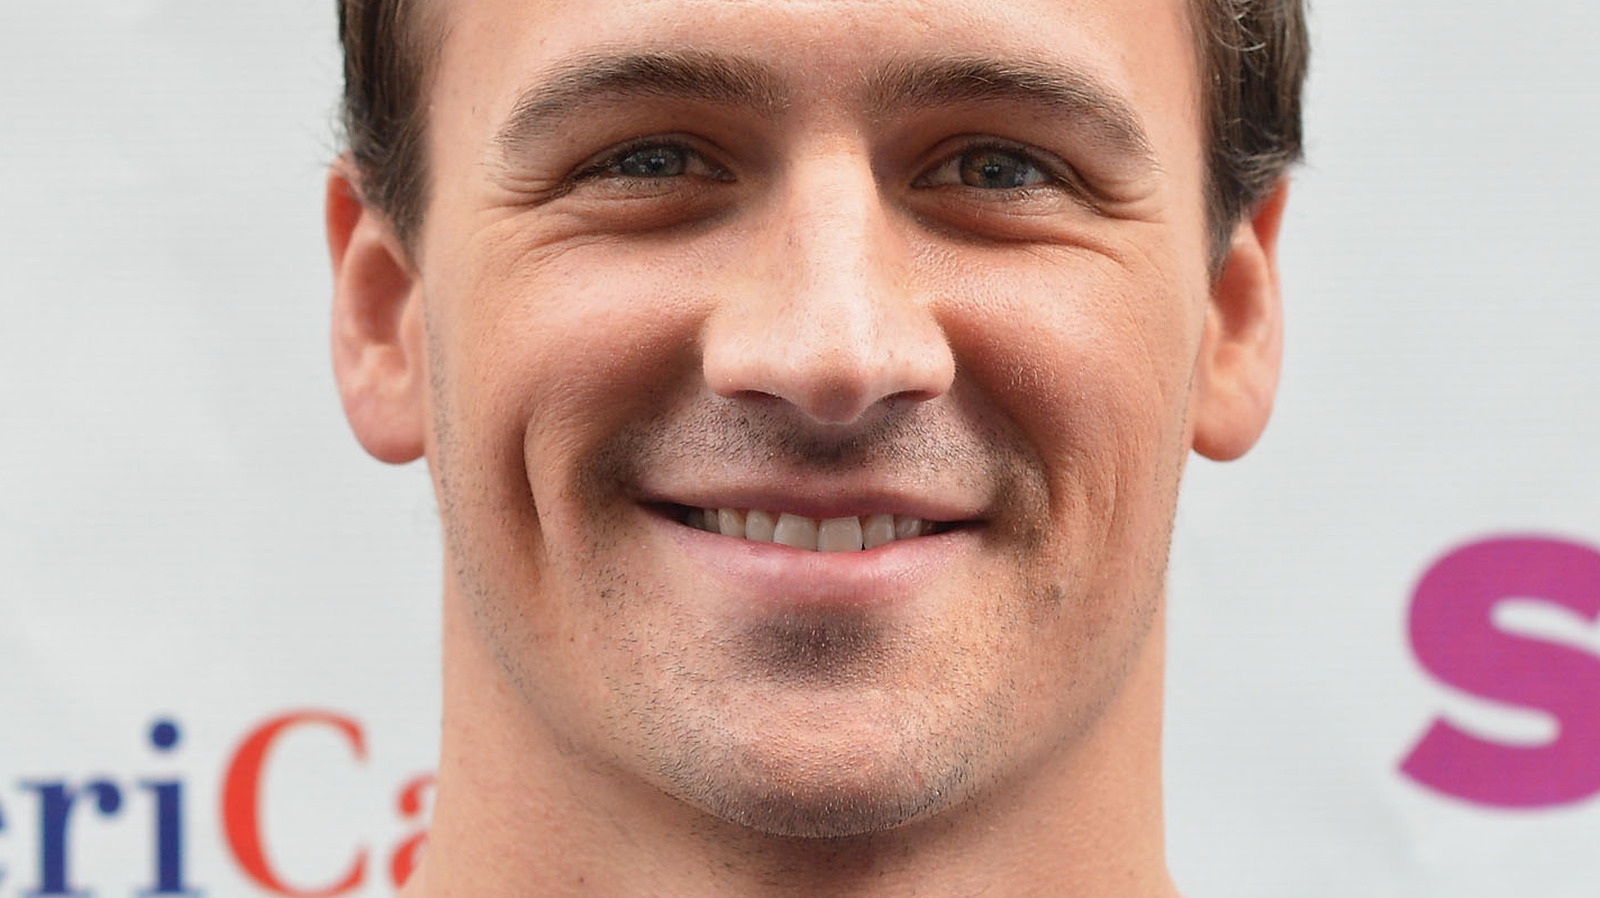 What Happened To Olympic Swimmer Ryan Lochte